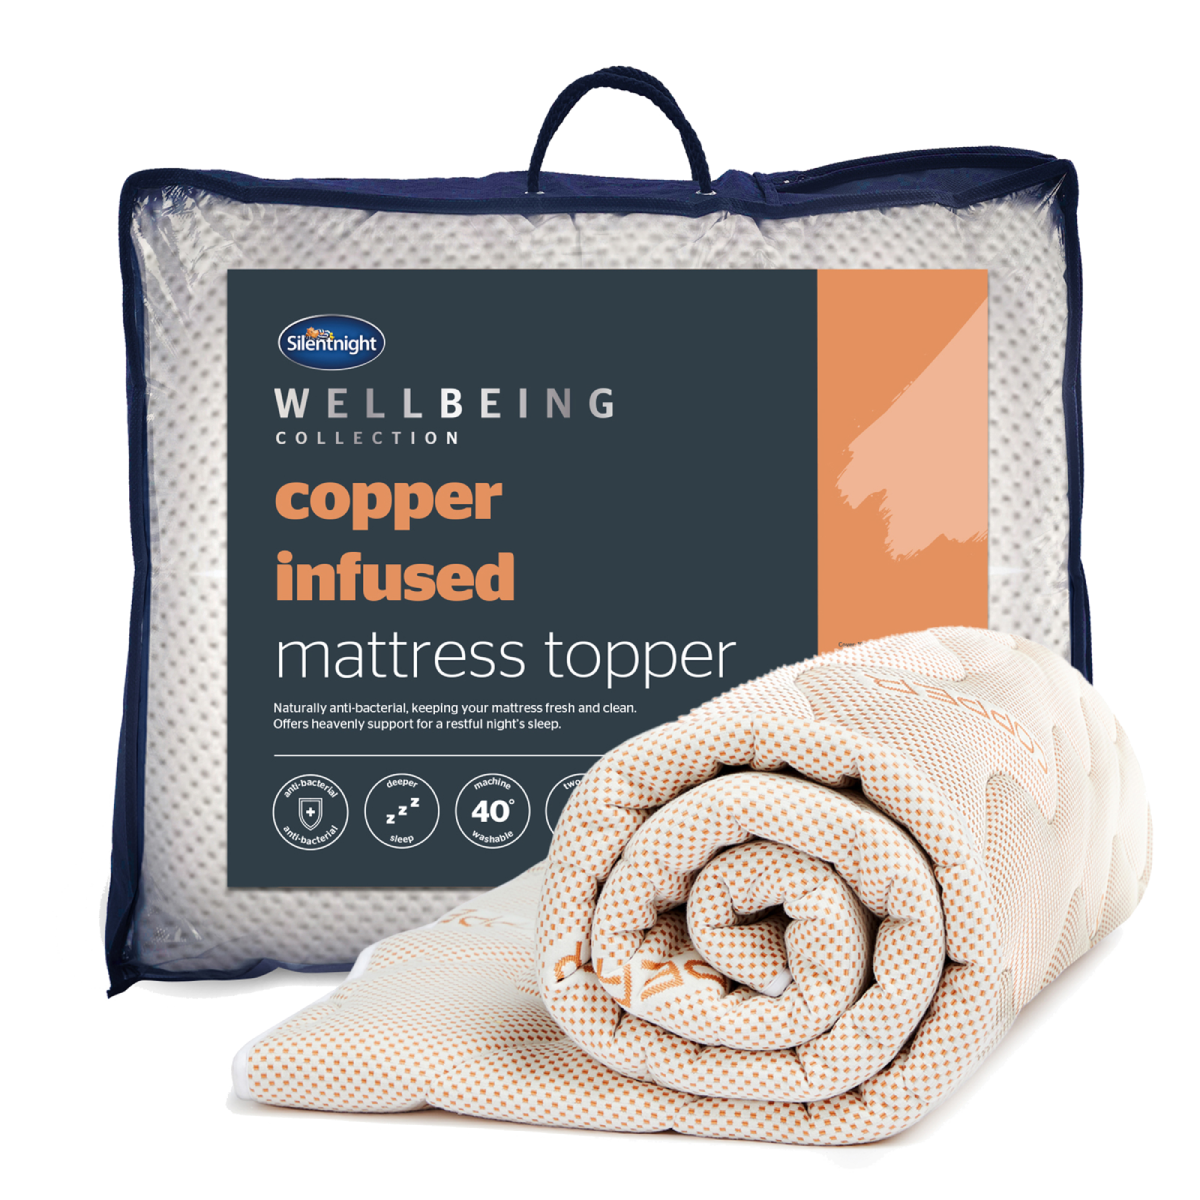 Silentnight Wellbeing - copper infused mattress topper